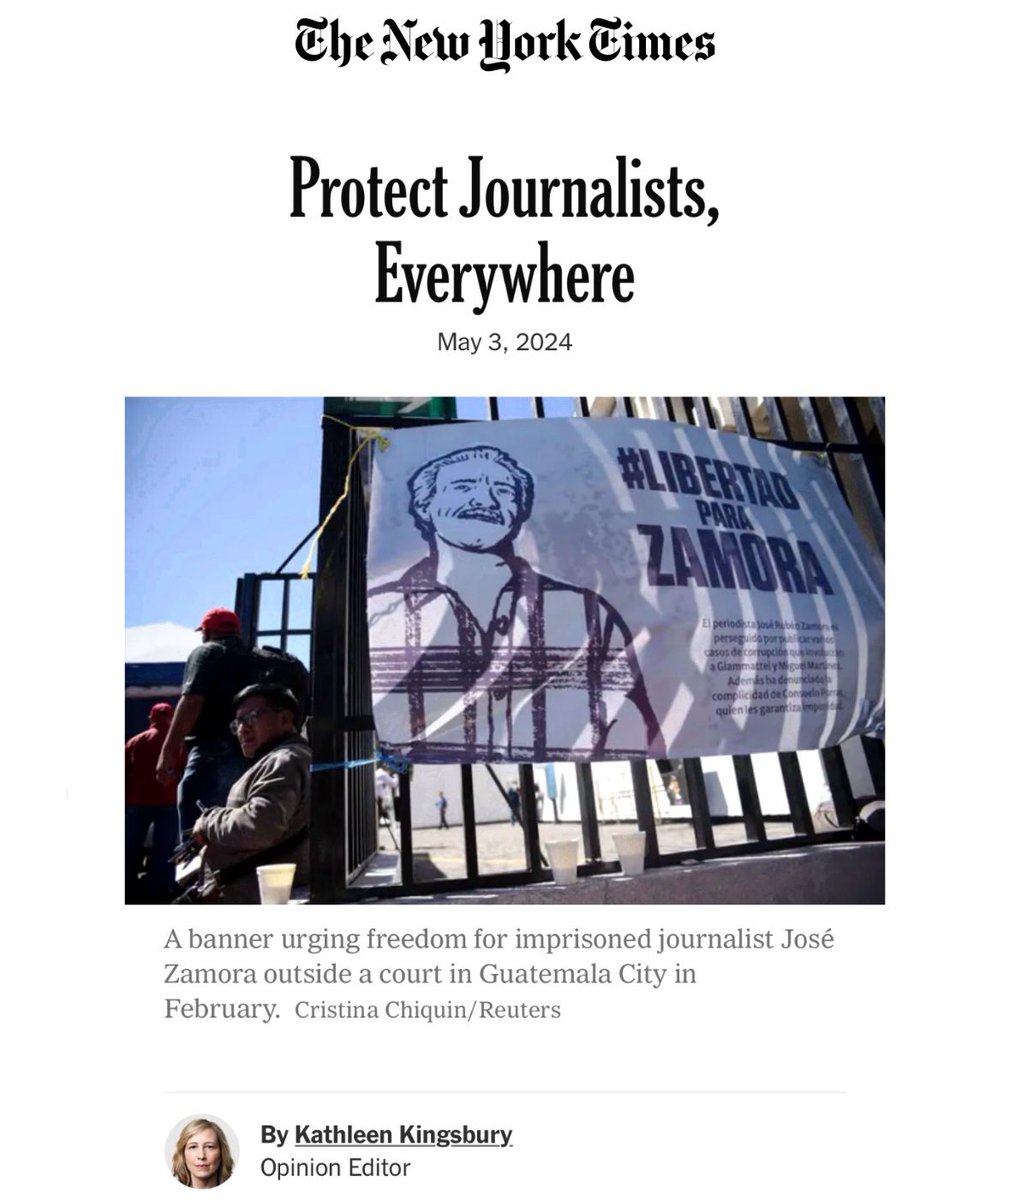 >> Protect Journalists, Everywhere - On World Press Freedom Day, a reminder of how many journalists are not free to do their vital work. ift.tt/HG0Q2aj by @katiekings (via @nytimes) #WPFD #PressFreedom